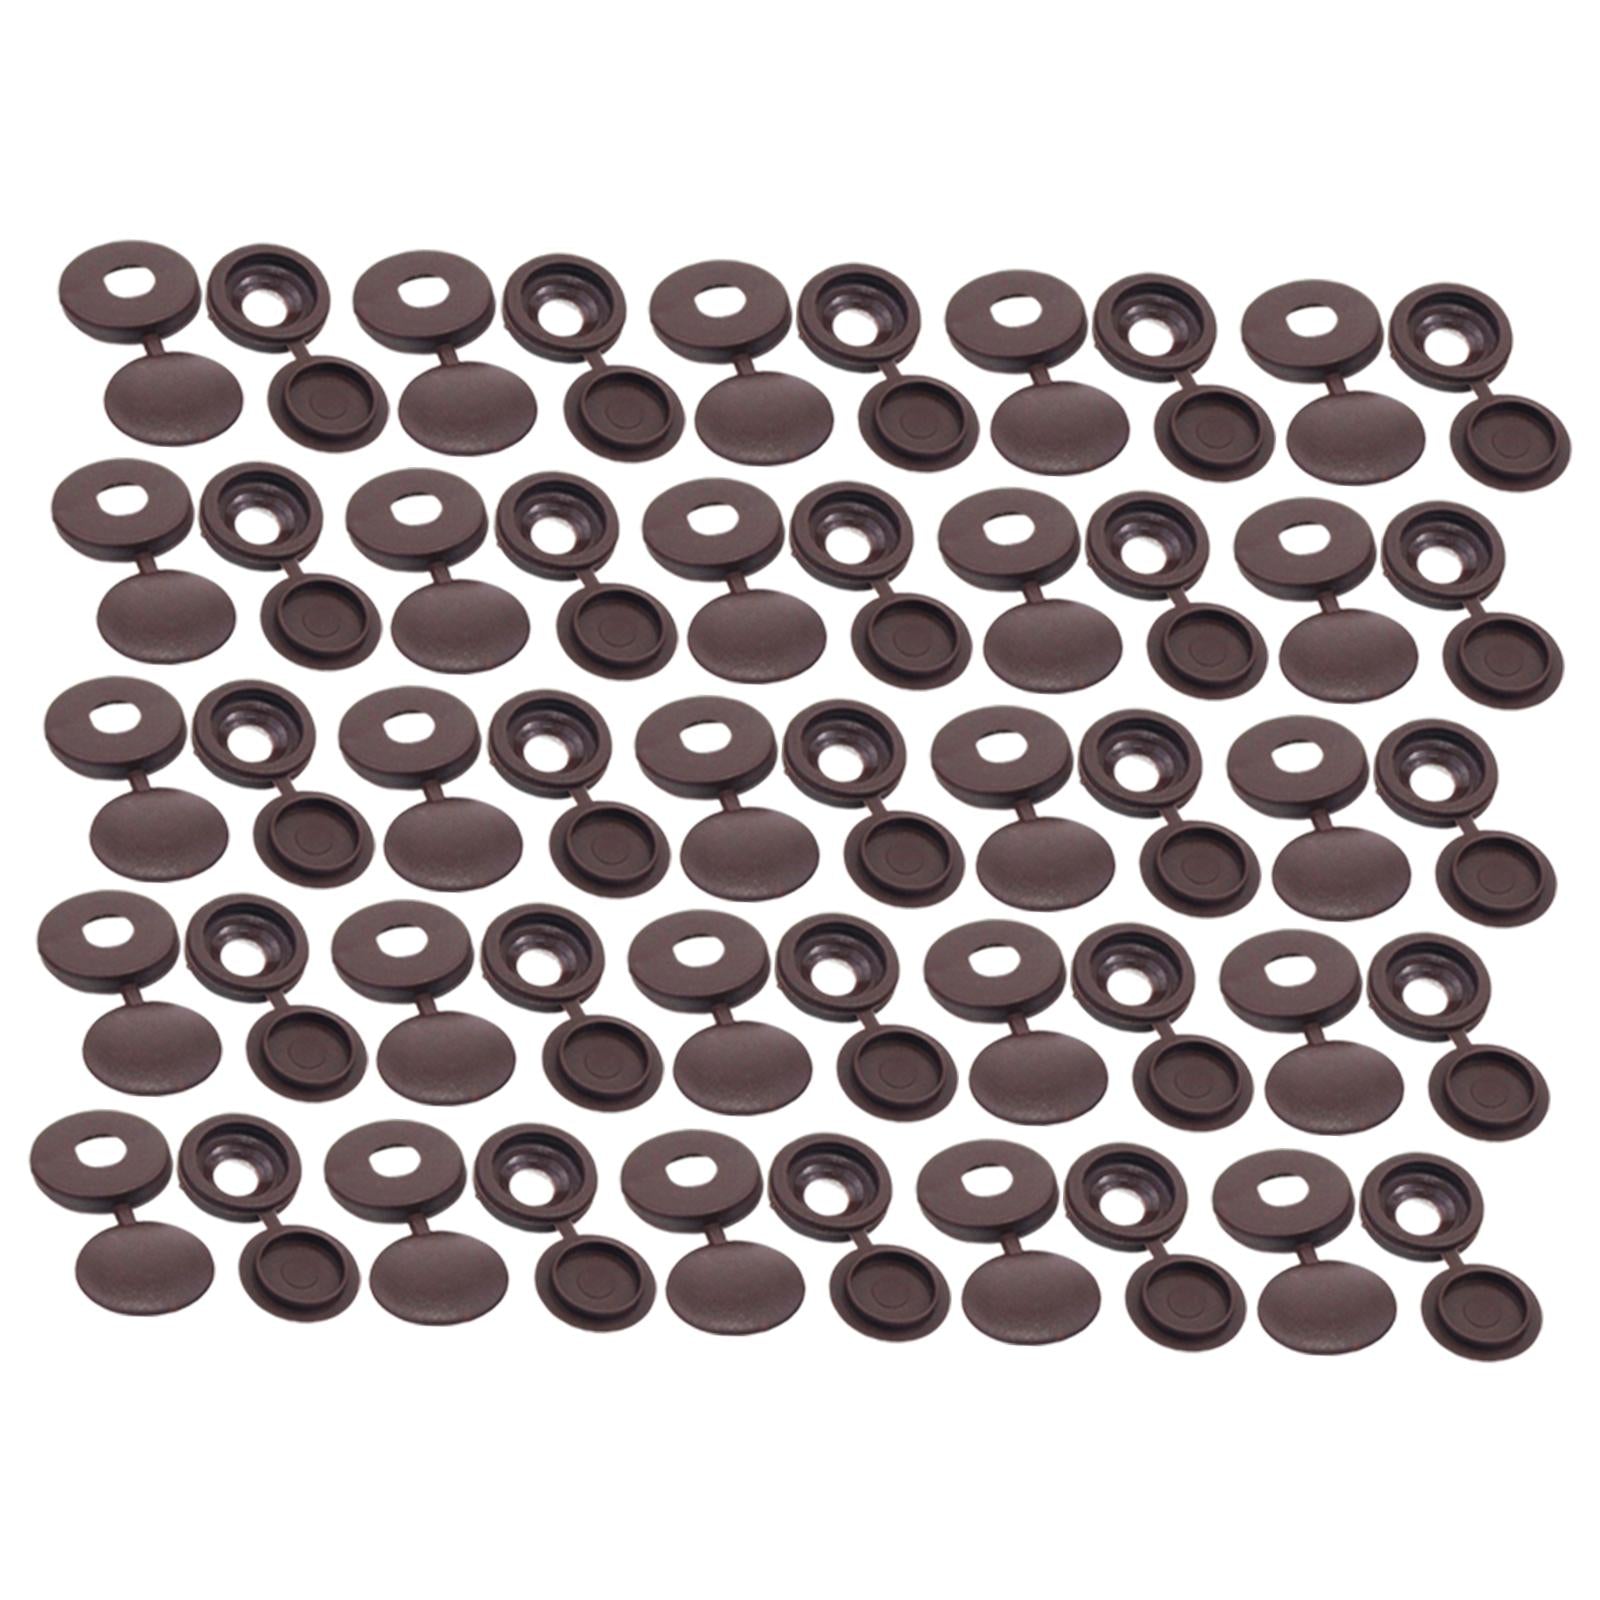 100 Pieces Screw Covers, Practical Screws Caps for Replacement Tools Yard Brown